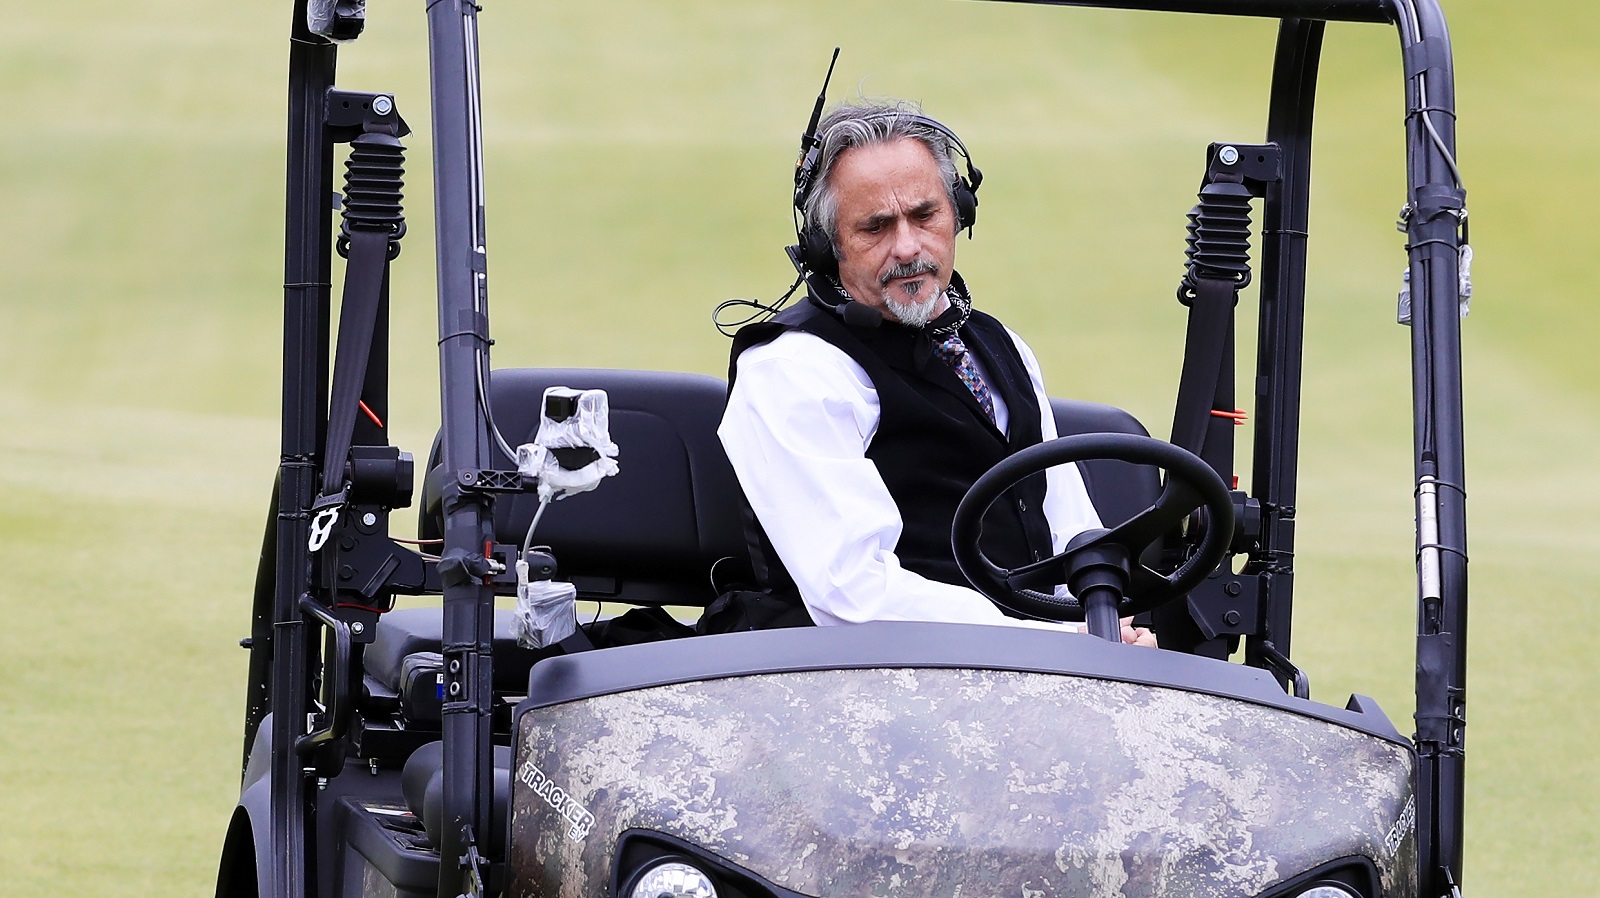 TV personality David Feherty looks on from an ATV during the Payne’s Valley Cup on Sept. 22, 2020, at Payne’s Valley course at Big Cedar Lodge in Ridgedale, Missouri. | Tom Pennington/Getty Images for Payne’s Valley Cup